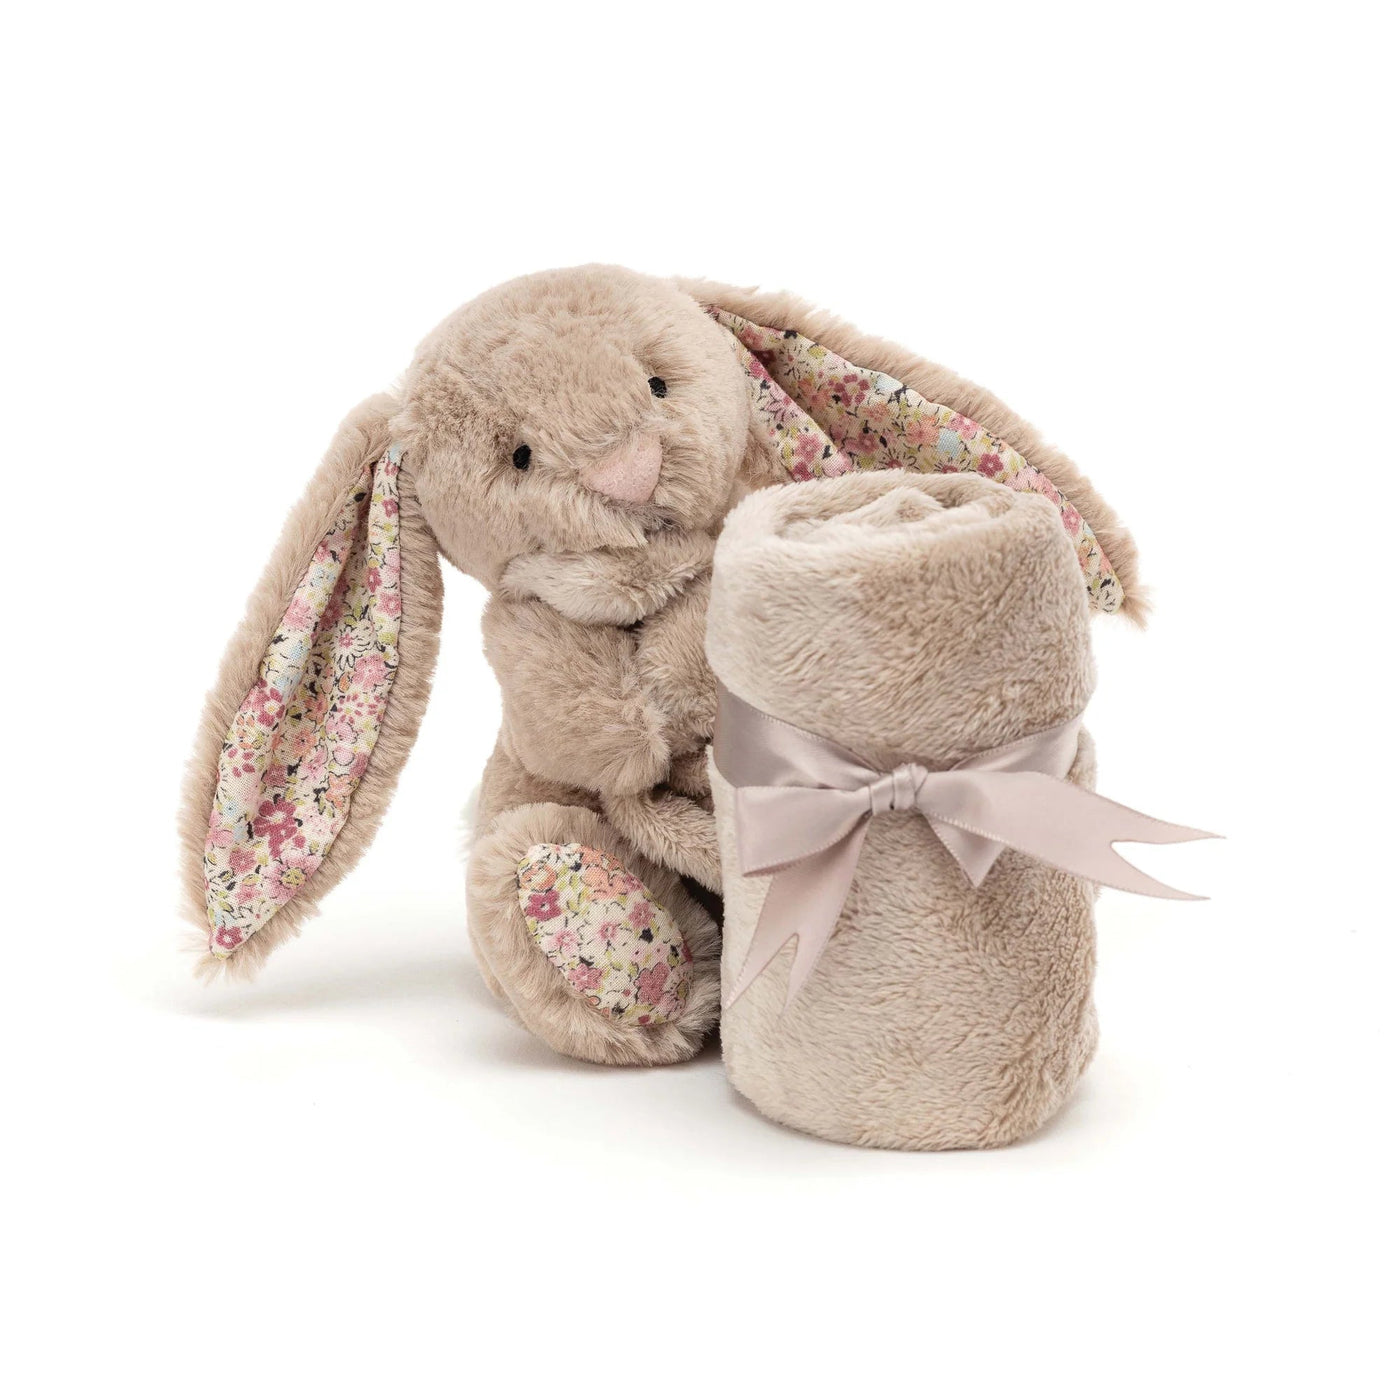 Jellycat Bashful Blossom Bea Beige Bunny Soother Soother Jellycat 